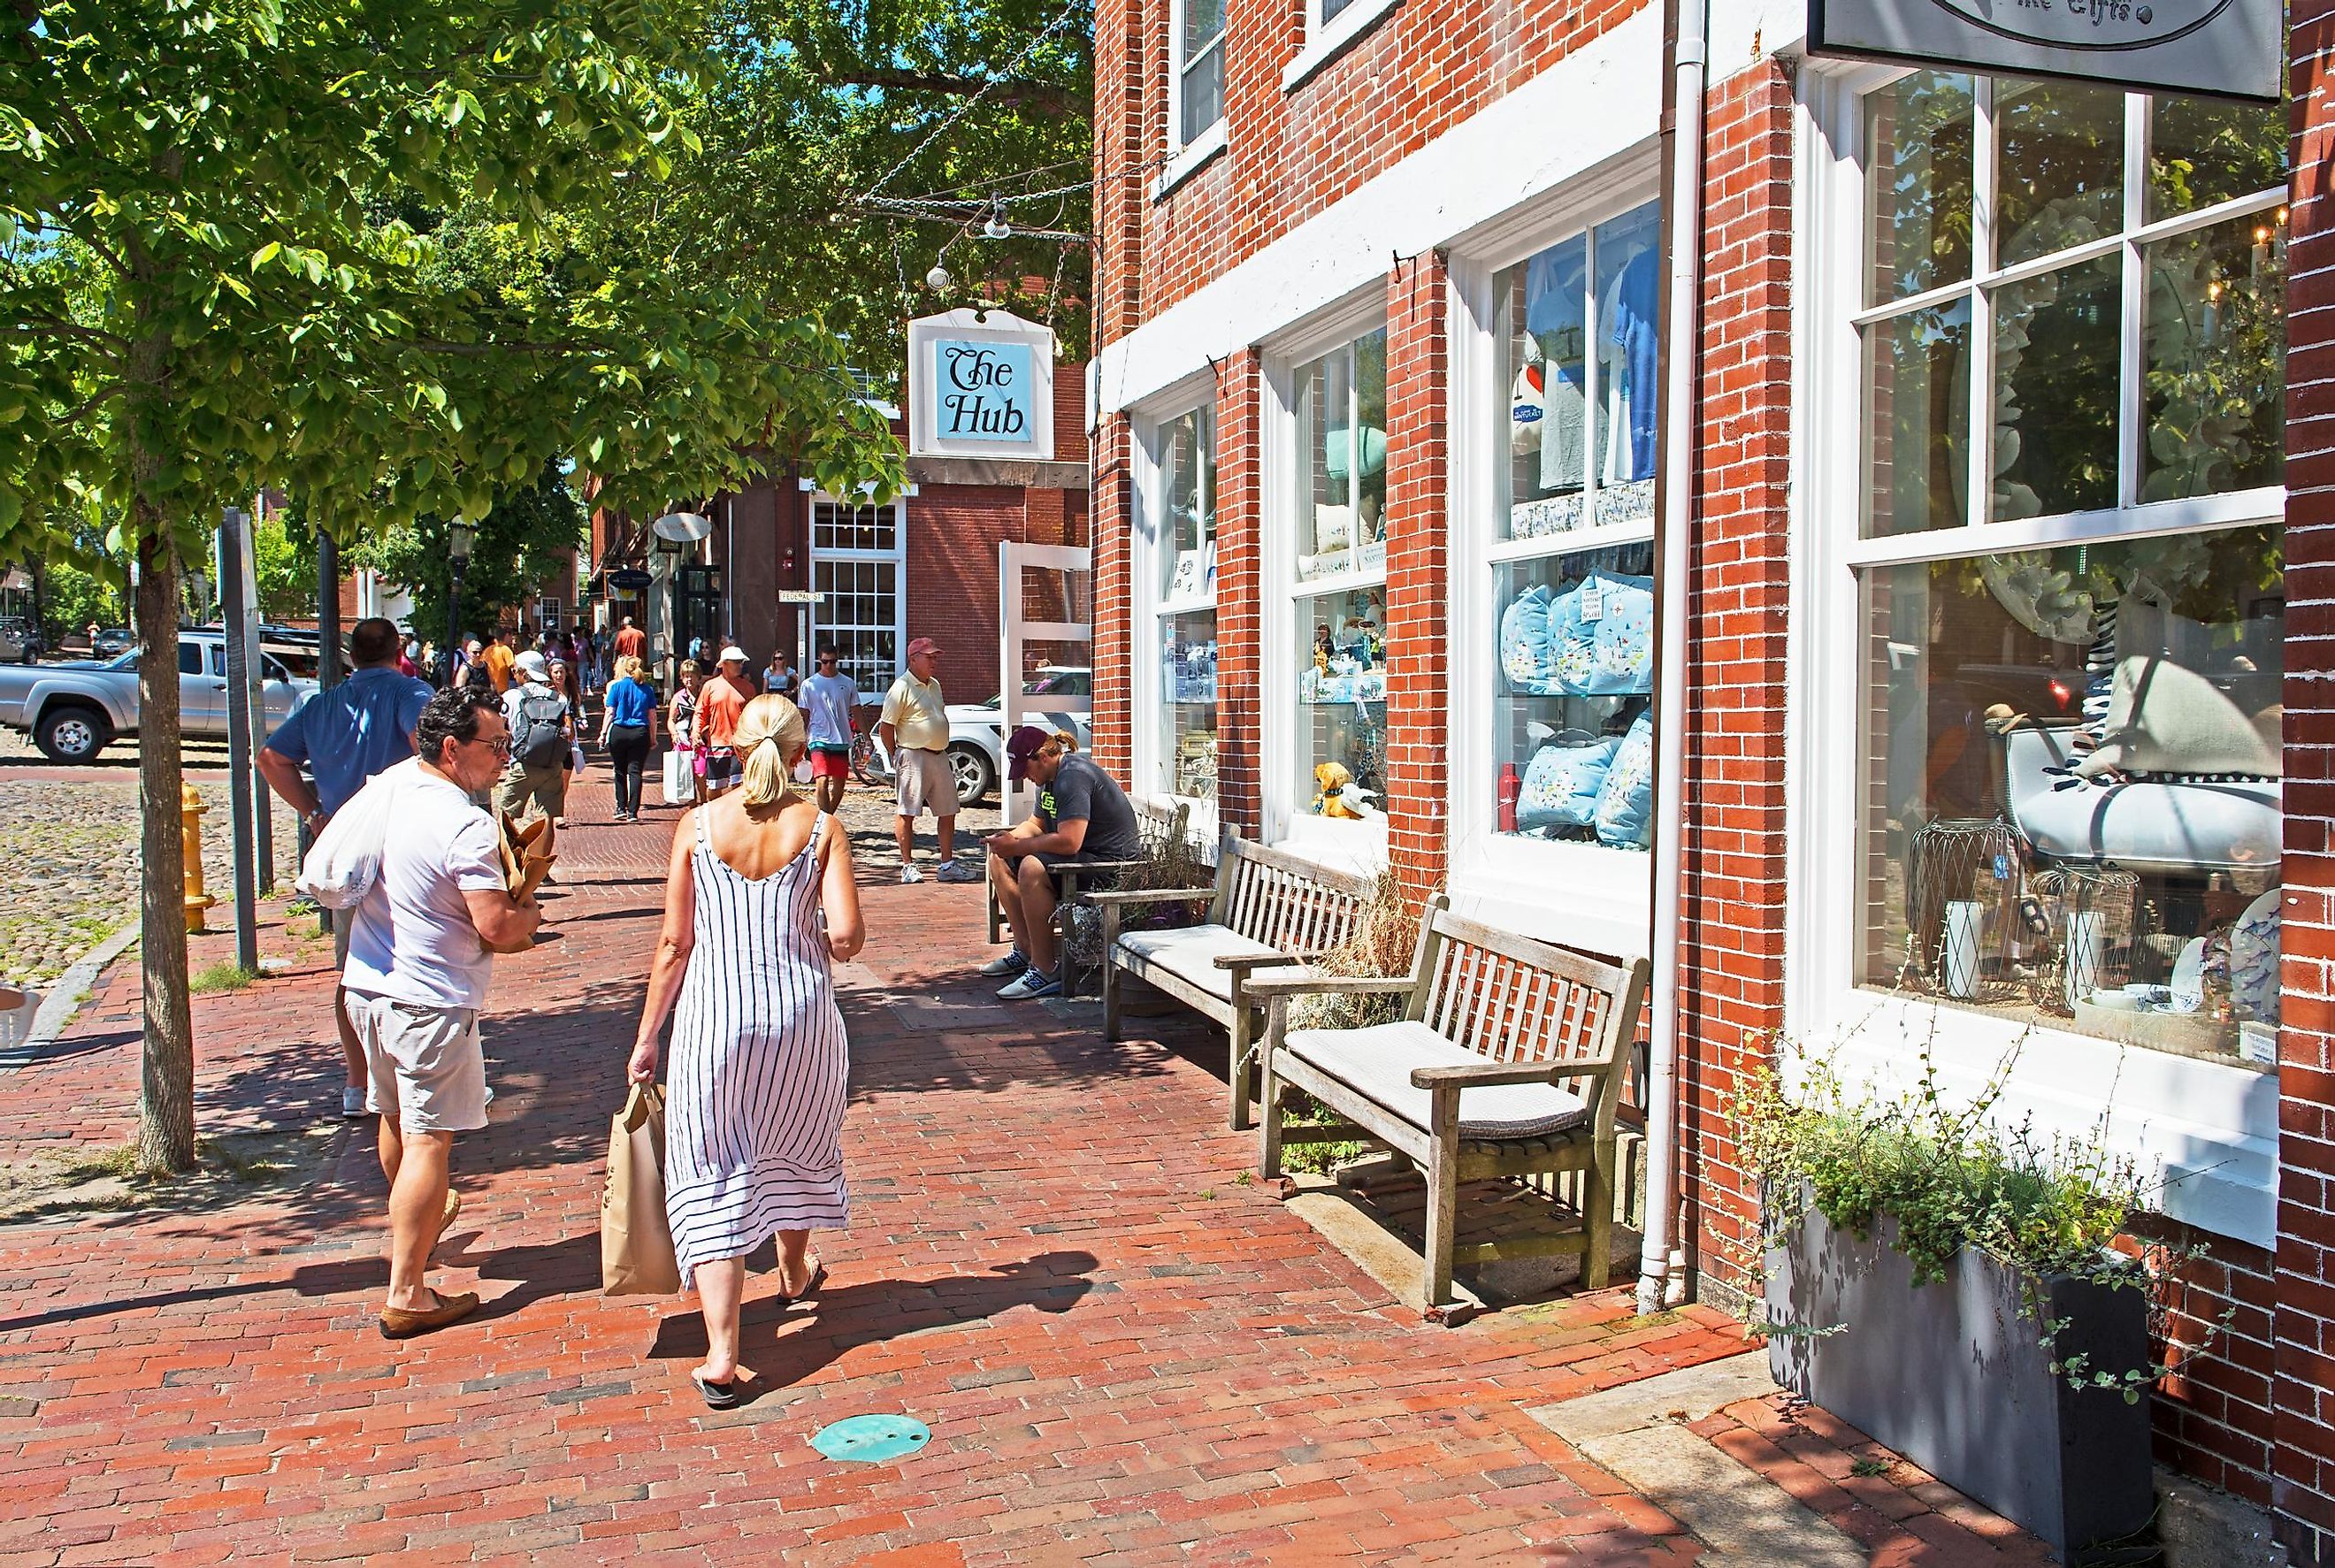 Nantucket, Massachusetts/USA - August 9 2019: the Town of Nantucket is home to an eclectic range of shops including high end galleries, clothes shops, souvenir stores, a bookshop and a liquor store.